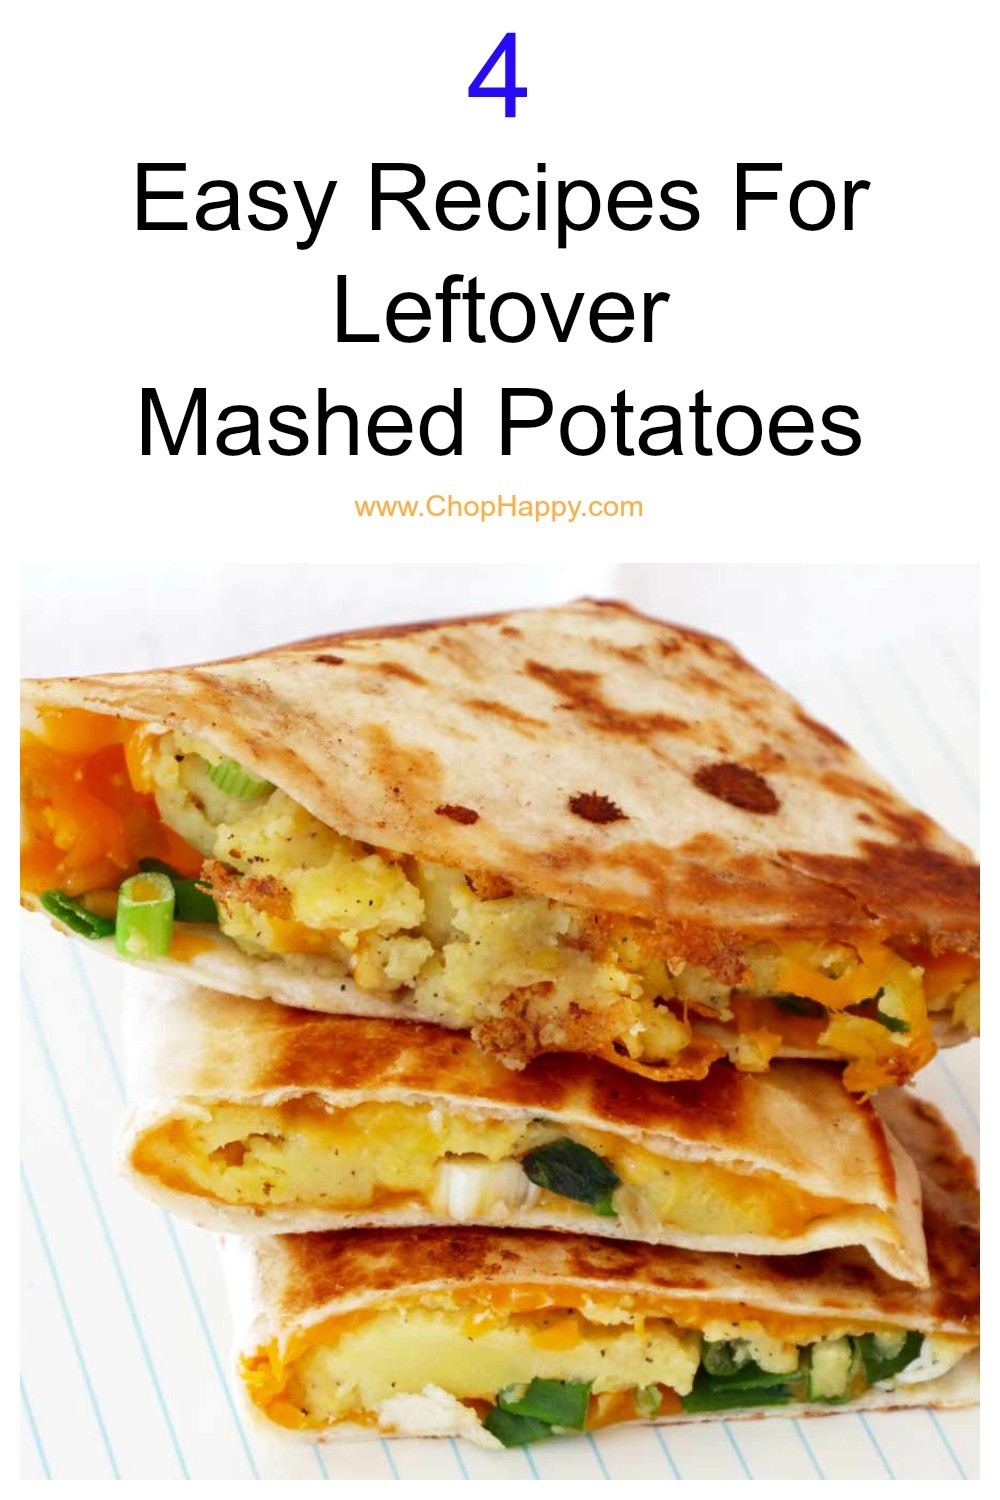 4 Easy Recipes For Leftover Mashed Potatoes. Quesadillas,lasagna, and casserole recipes. Happy Mashed Potato Cooking! www.ChopHappy.com #mashedpotatoes #leftovers